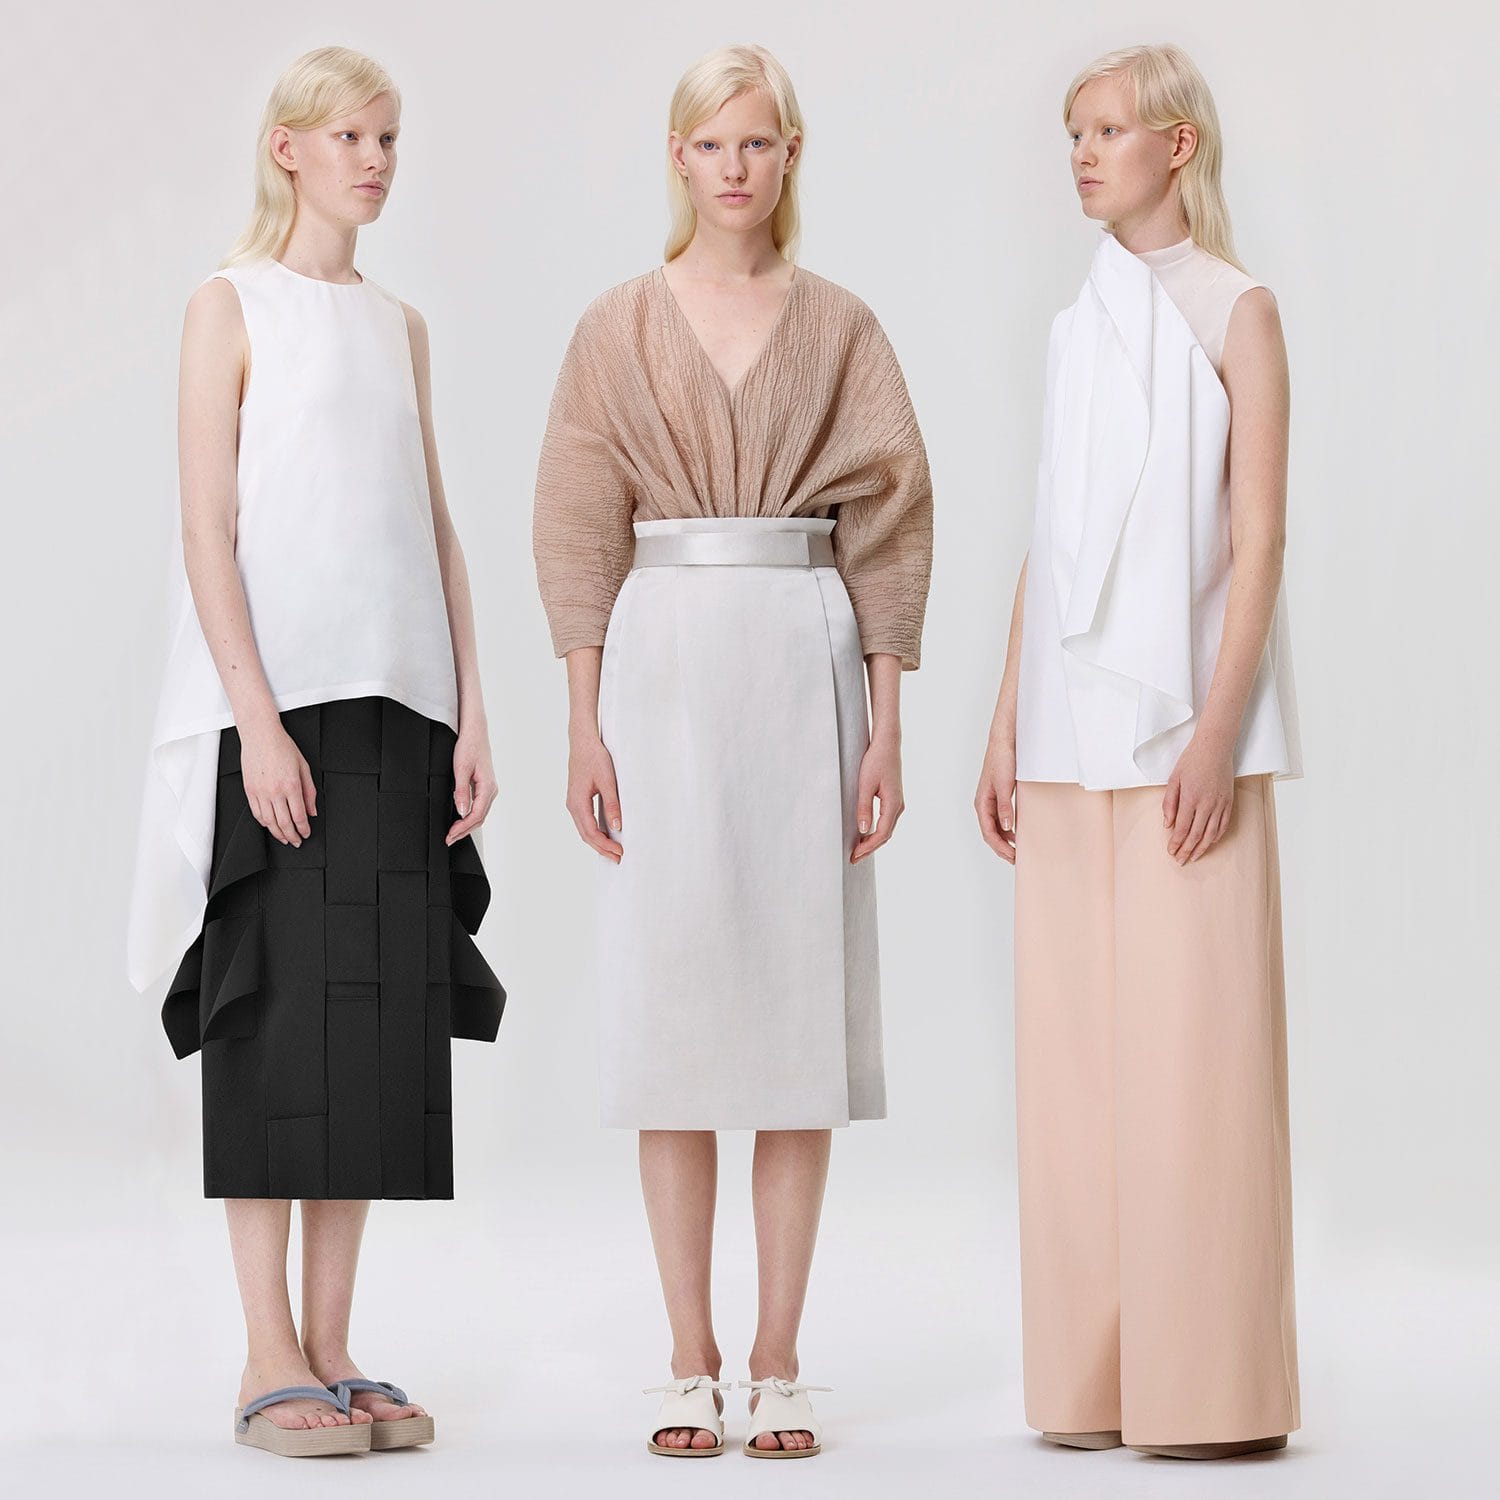 Nordic chic: 8 Scandi brands you need to know